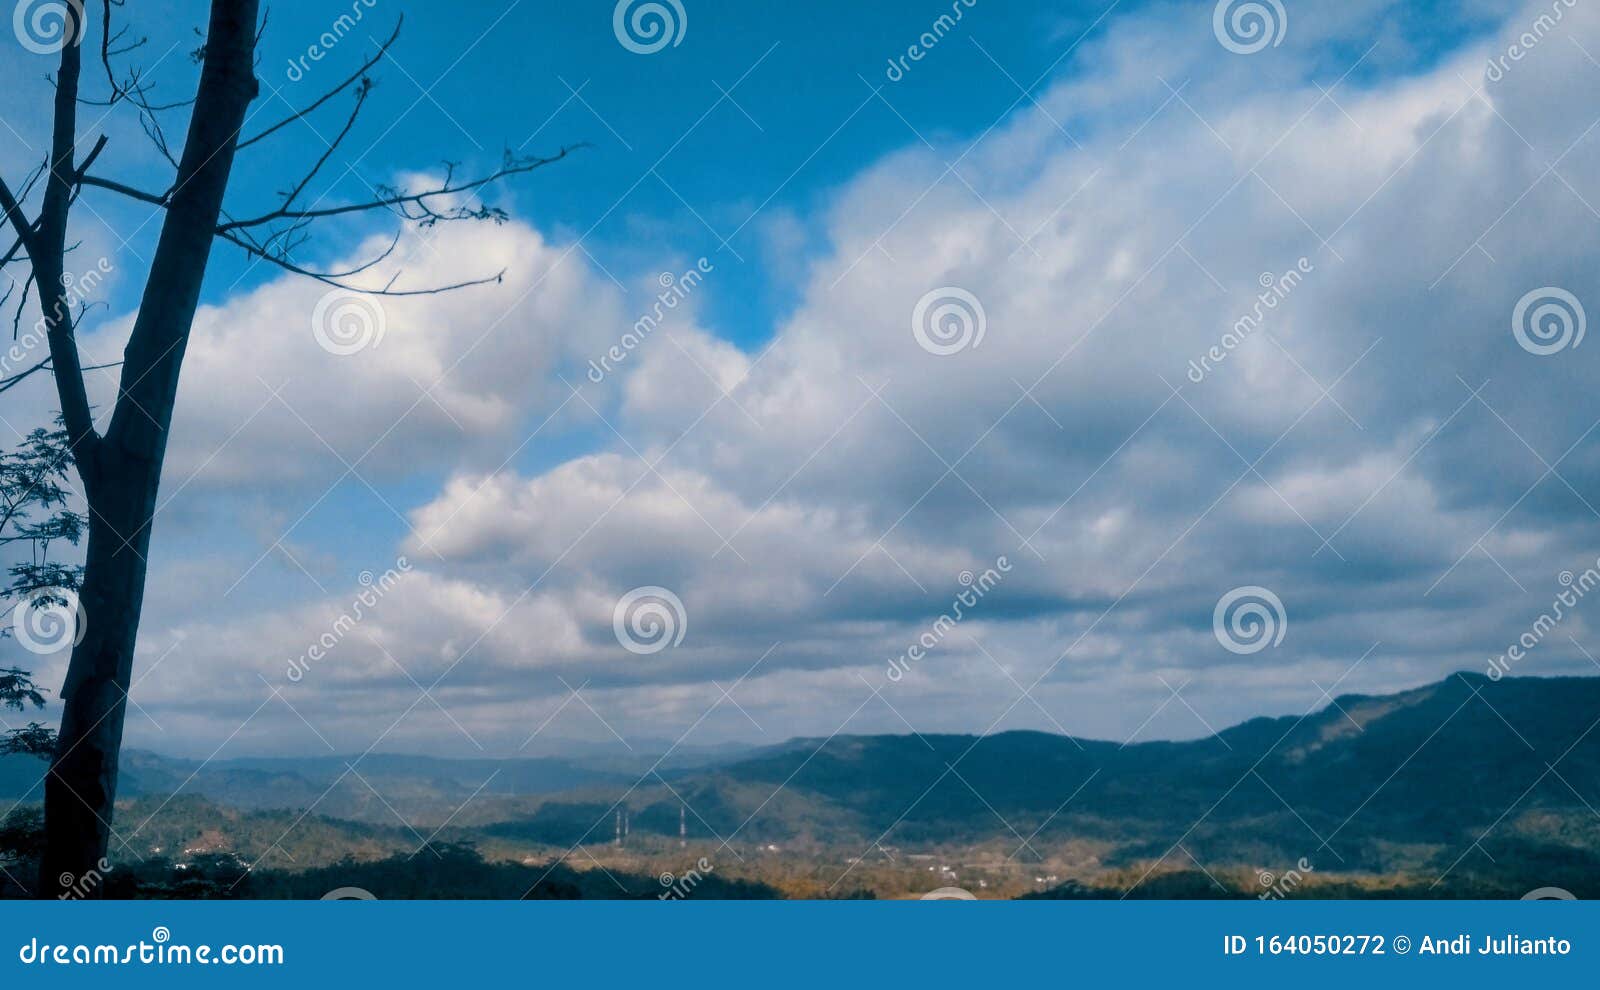 landscapes nature with blue sky and clouds.not in focus